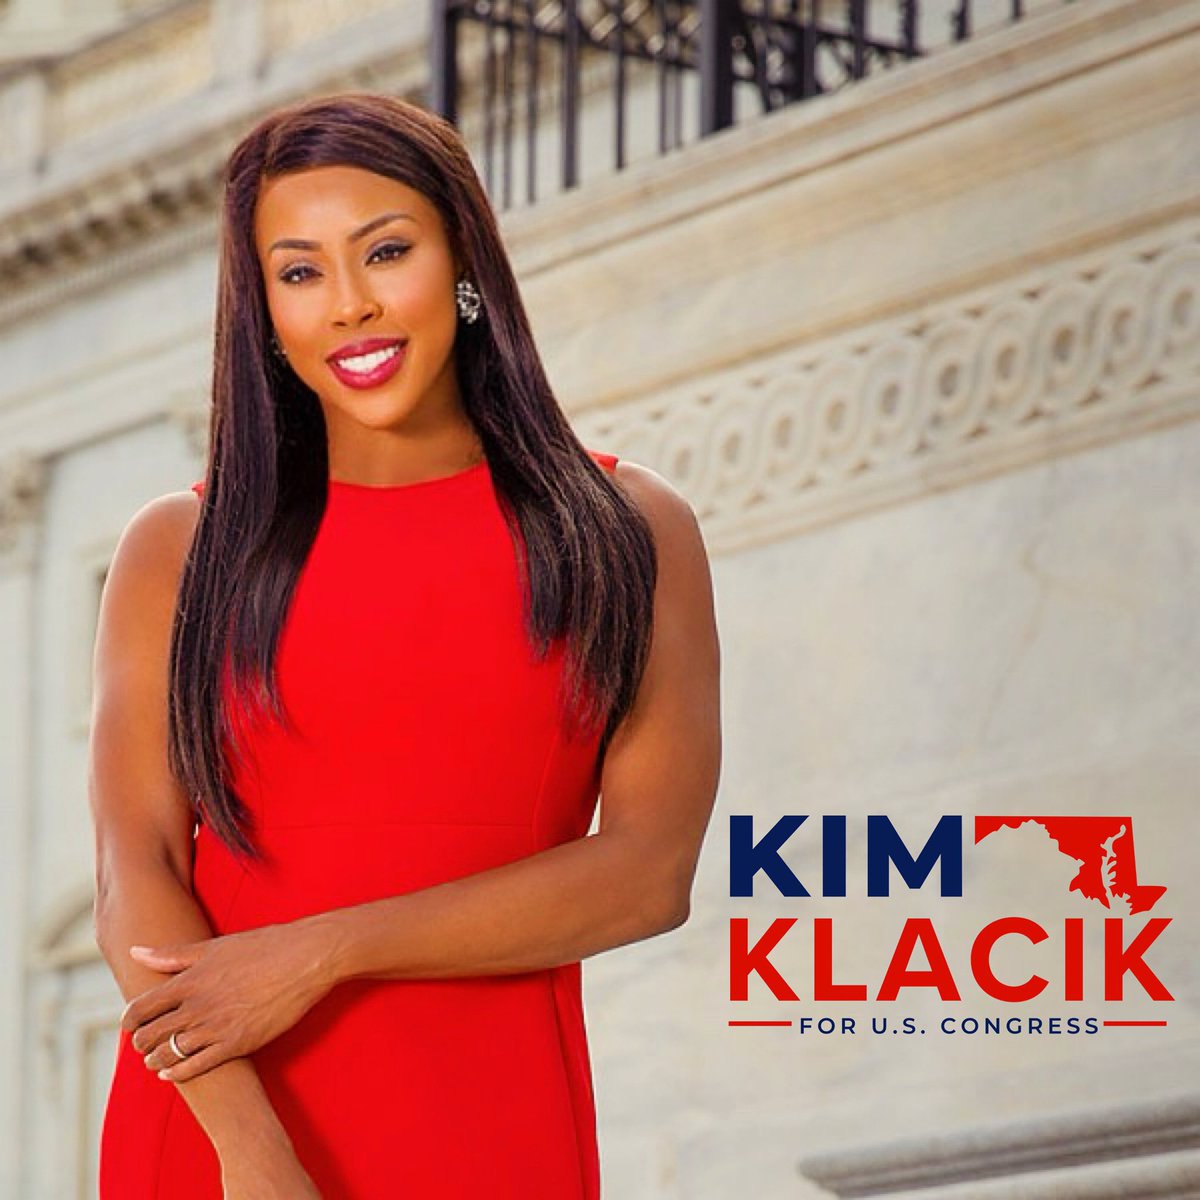 Kim Klacik is in Maryland’s 2nd congressional district. Early voting runs until May 9th. Primary Election Day is May 14th. Y’all get out there and VOTE! KimKForCongress.com